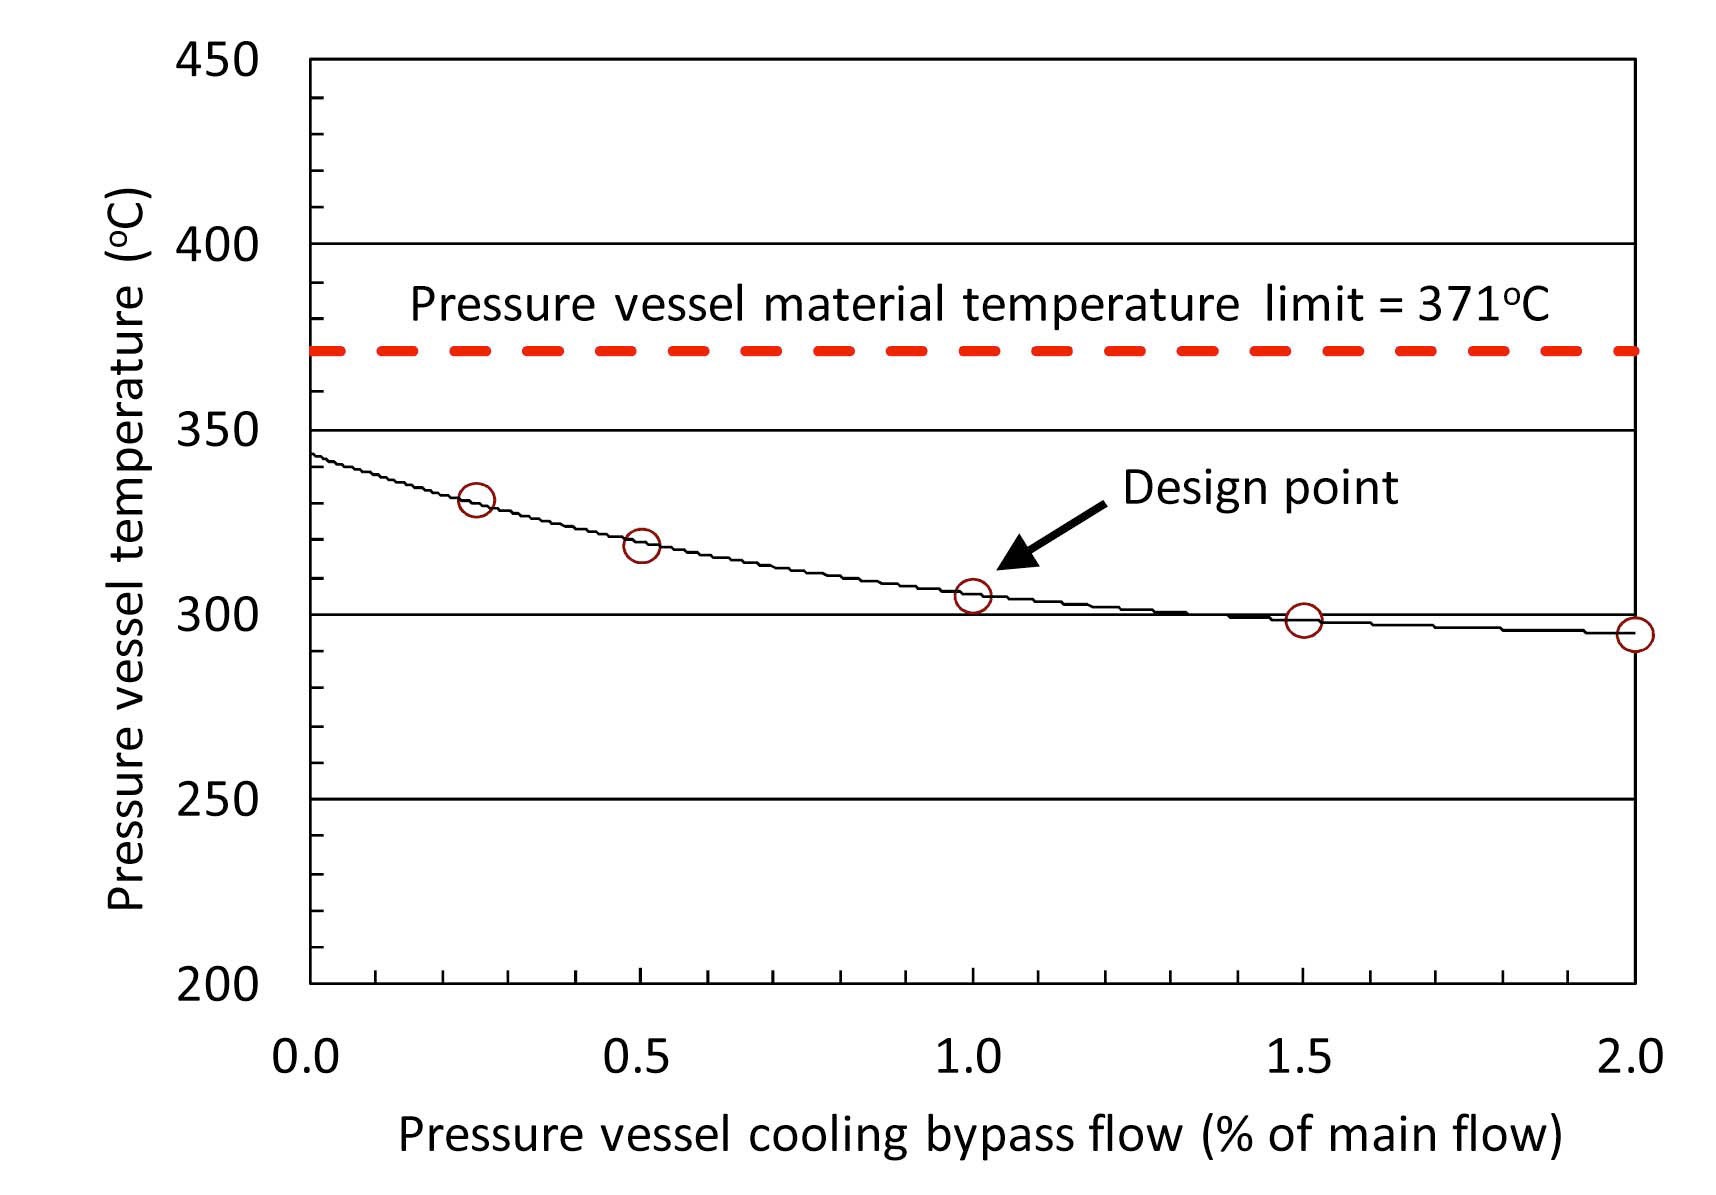 Sensitivity of IHX Pressure Vessel Temperature to Cooling Bypass Flow Rate